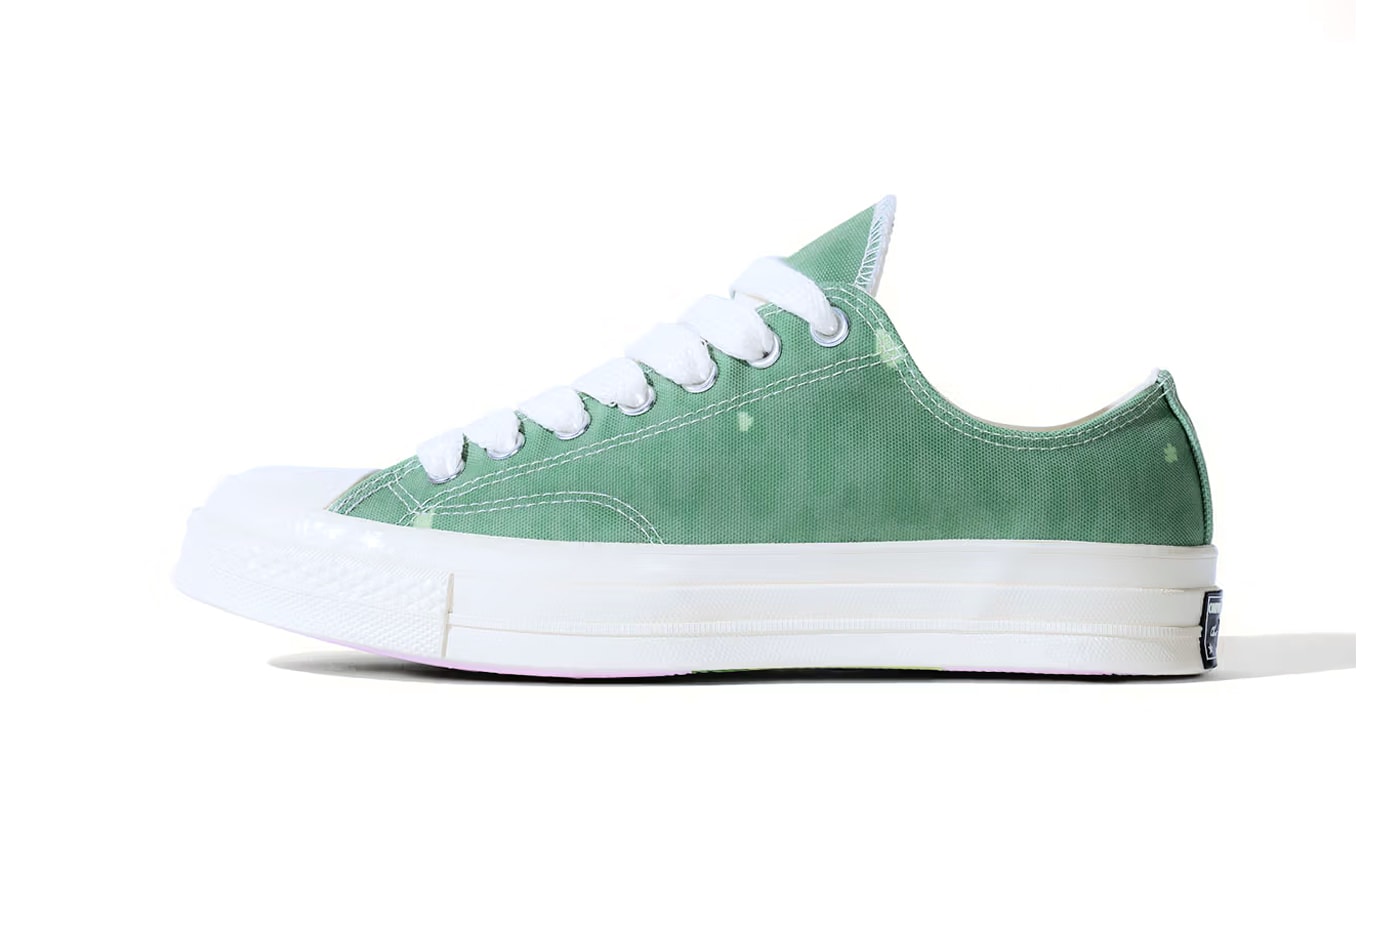 Converse x le FLEUR* Unveil Four New Camo Chuck 70s tyler the creator coachella high top laces collab footwear sneaker one star collaboration shoe golf drop release price size laces colorway upper white black brown blue camoflauge logo branding 